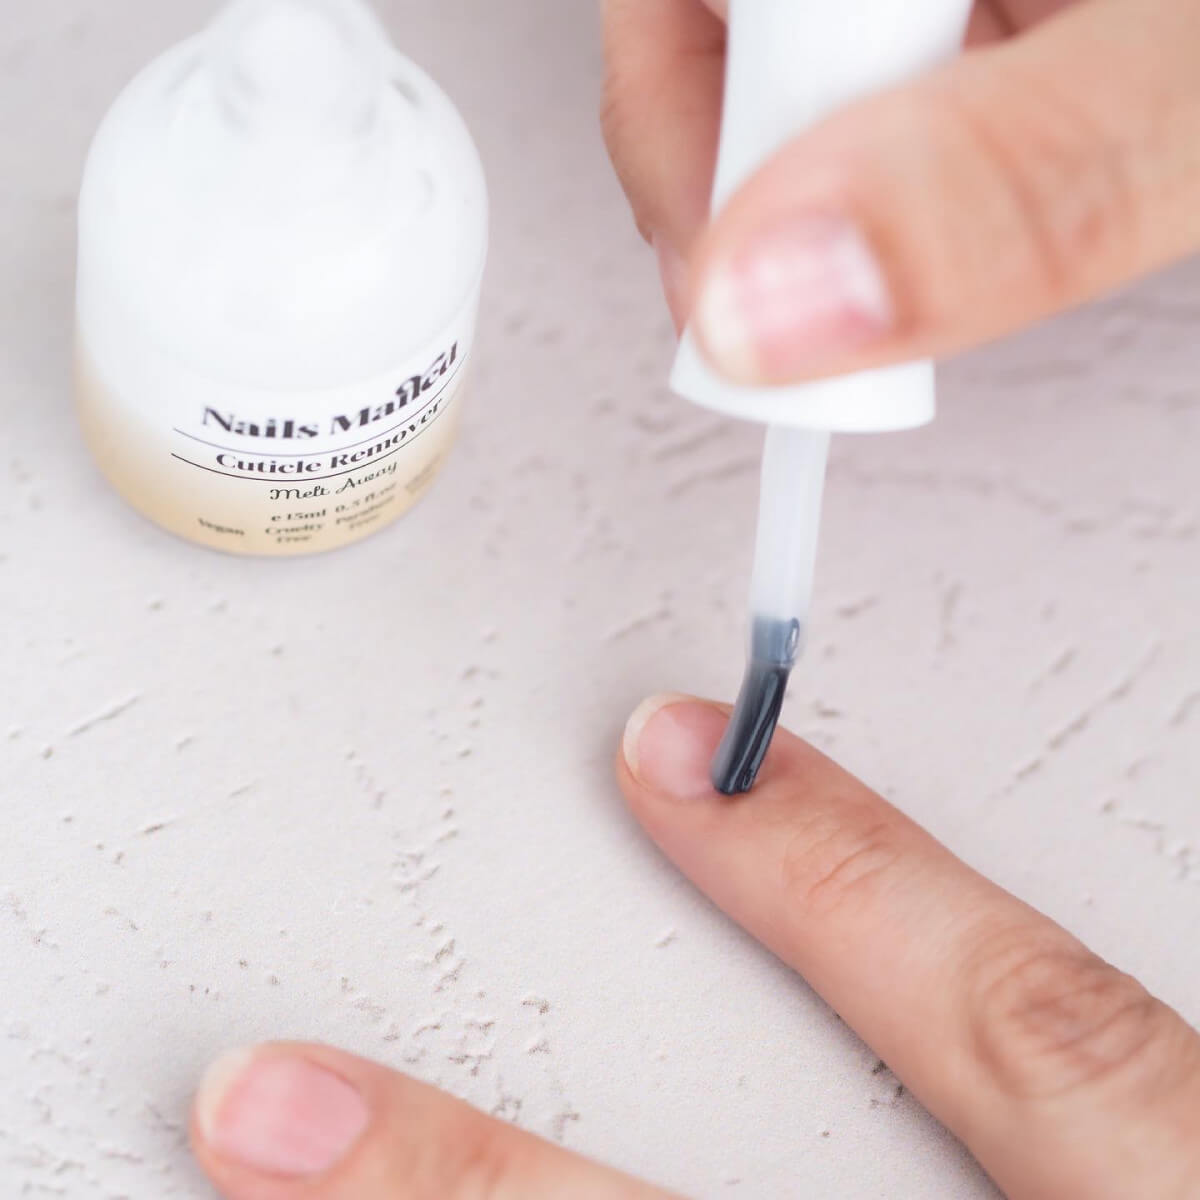 Caring for your nails is easy with our nail kit. Perfect for prepping your nails for all your nail art!